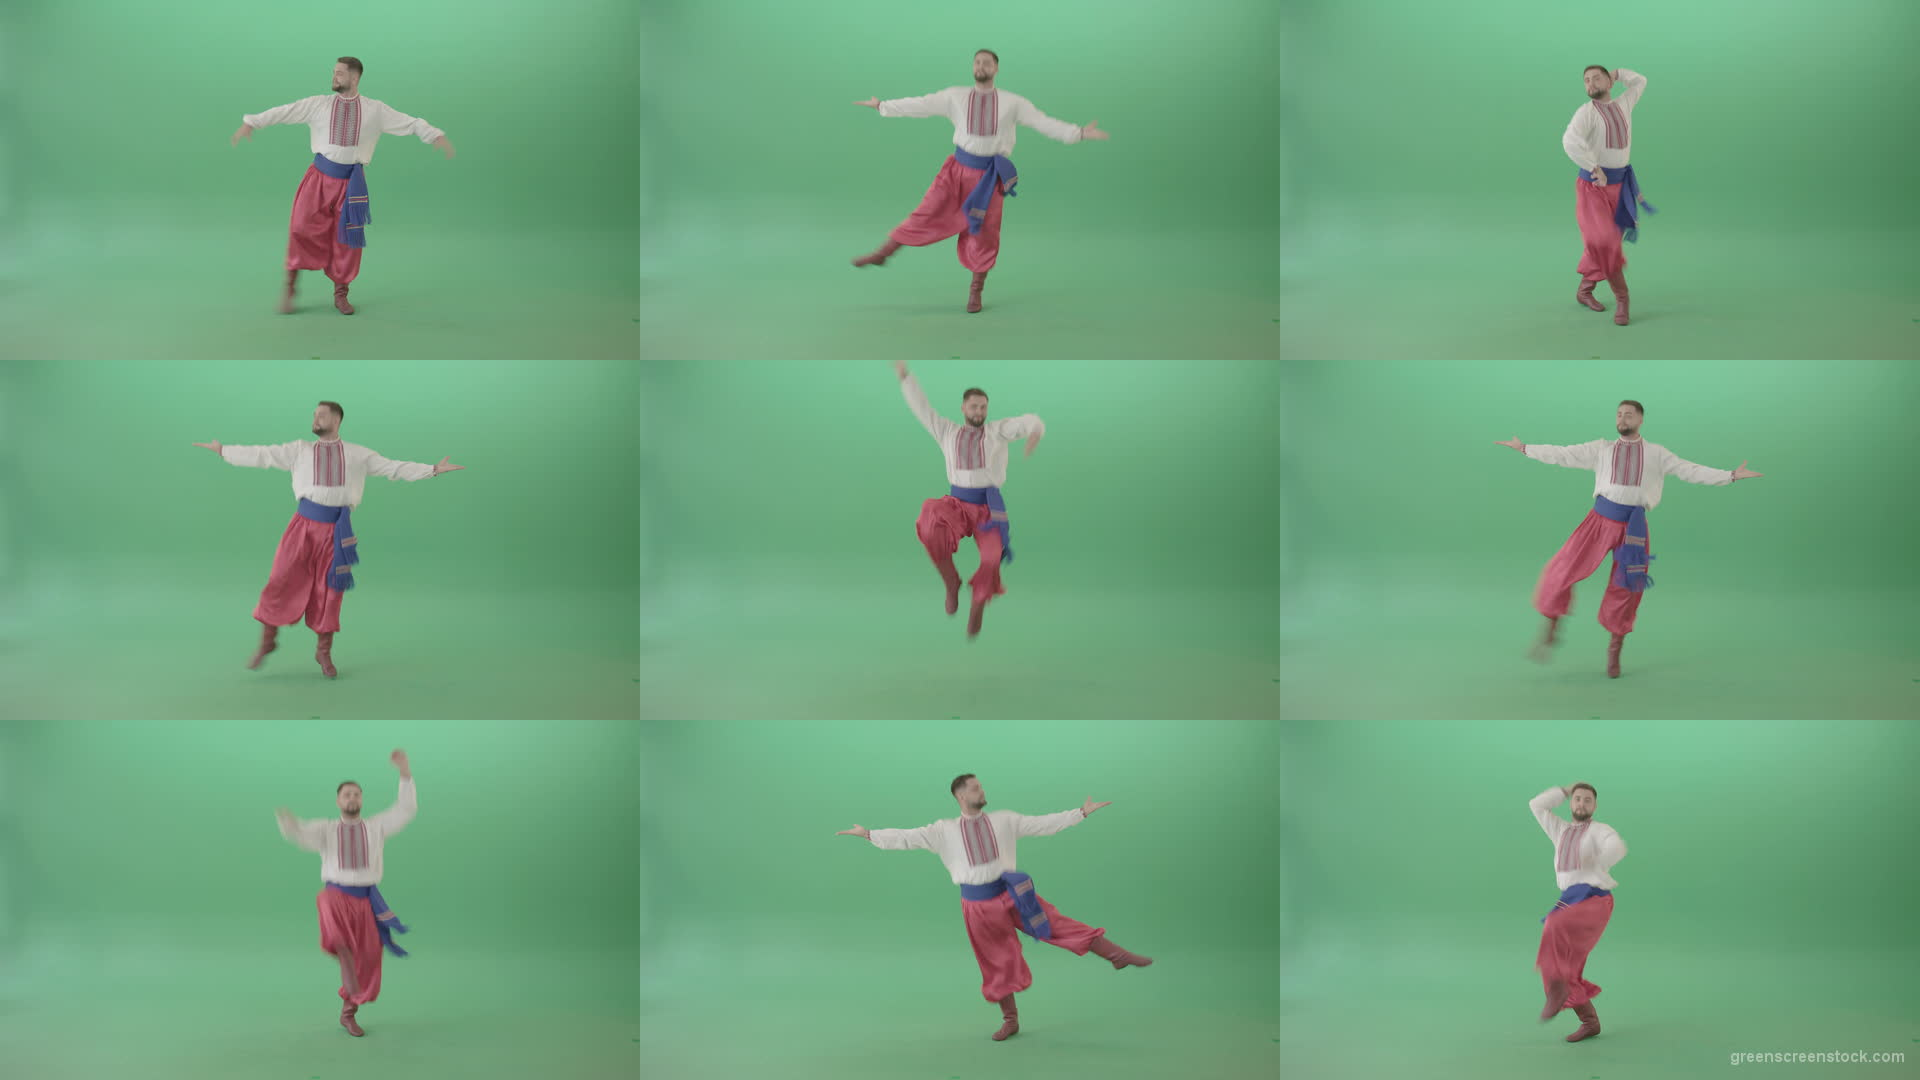 Slavic-Ukraine-folk-dance-by-UA-Cossack-man-jumping-isolated-on-Green-Background-4K-Video-Footage-1920 Green Screen Stock